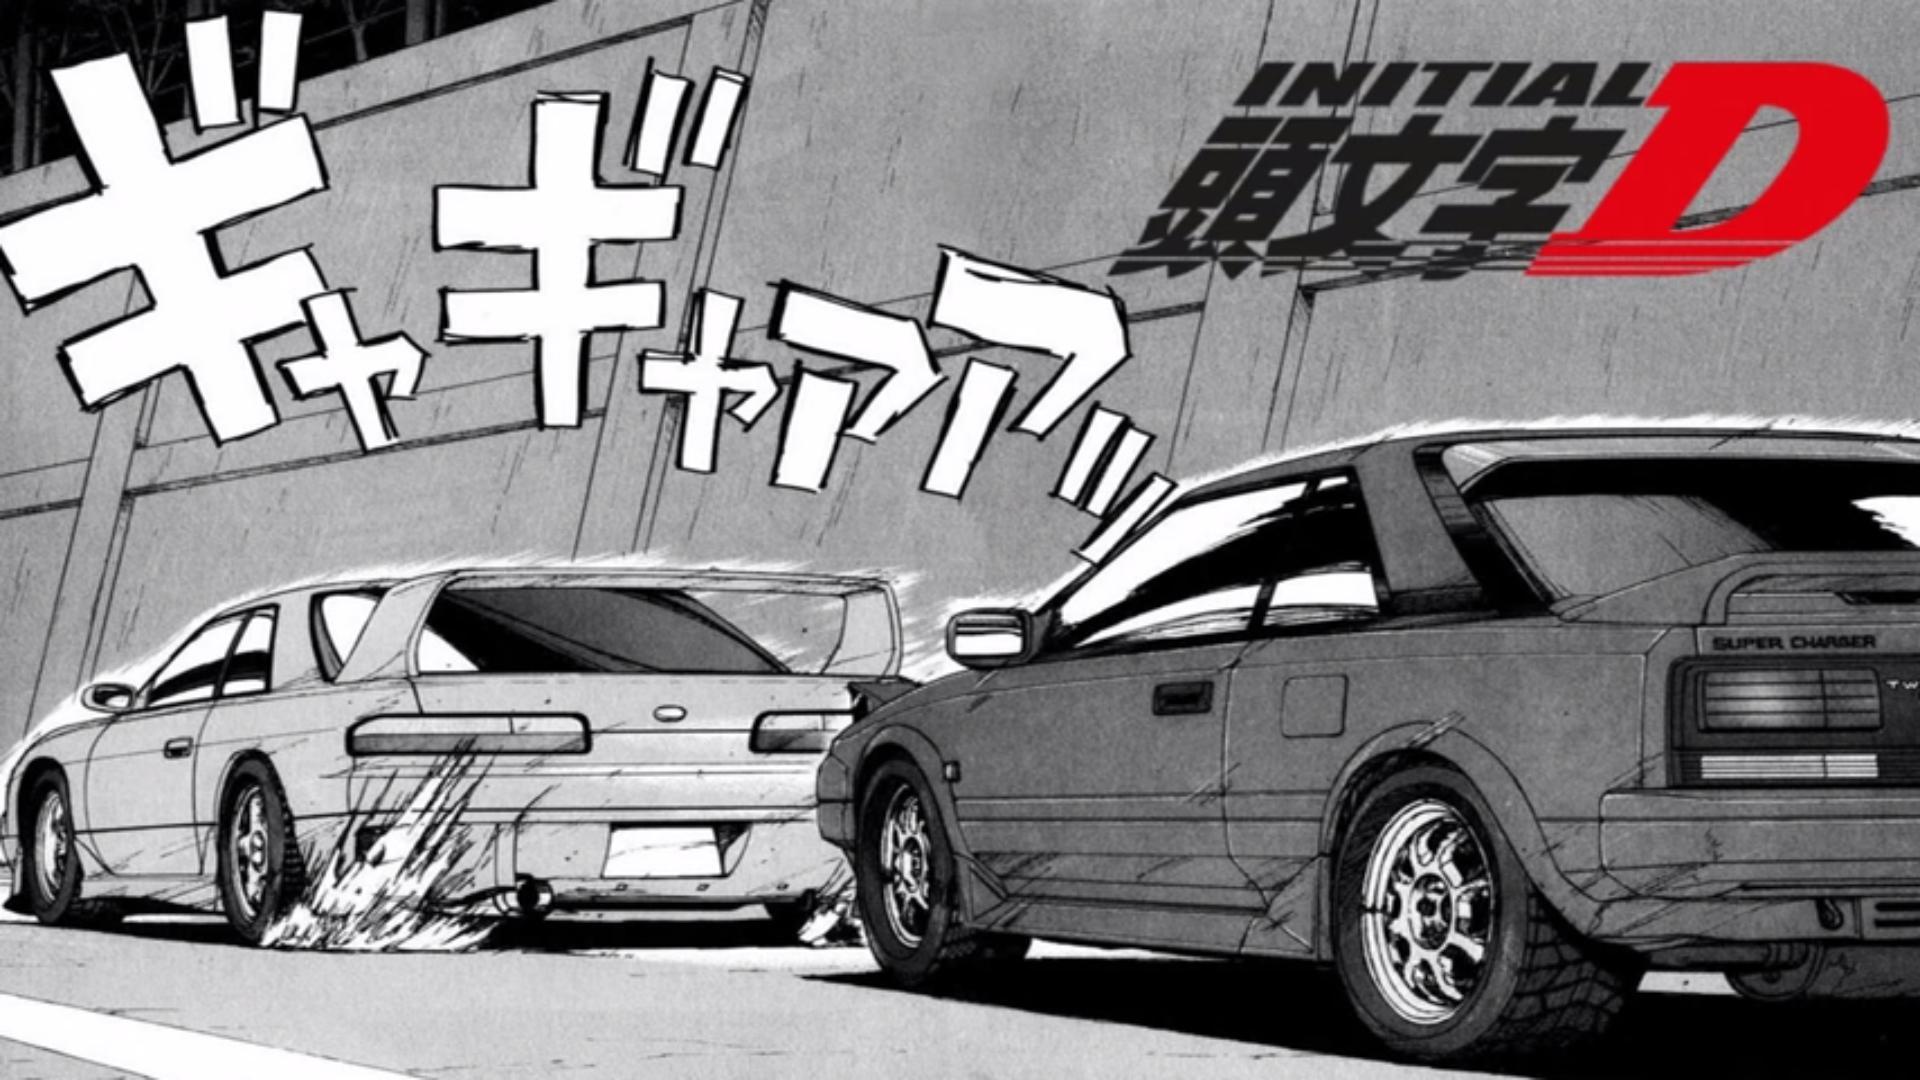 Details 92+ aesthetic initial d wallpaper latest - in.cdgdbentre